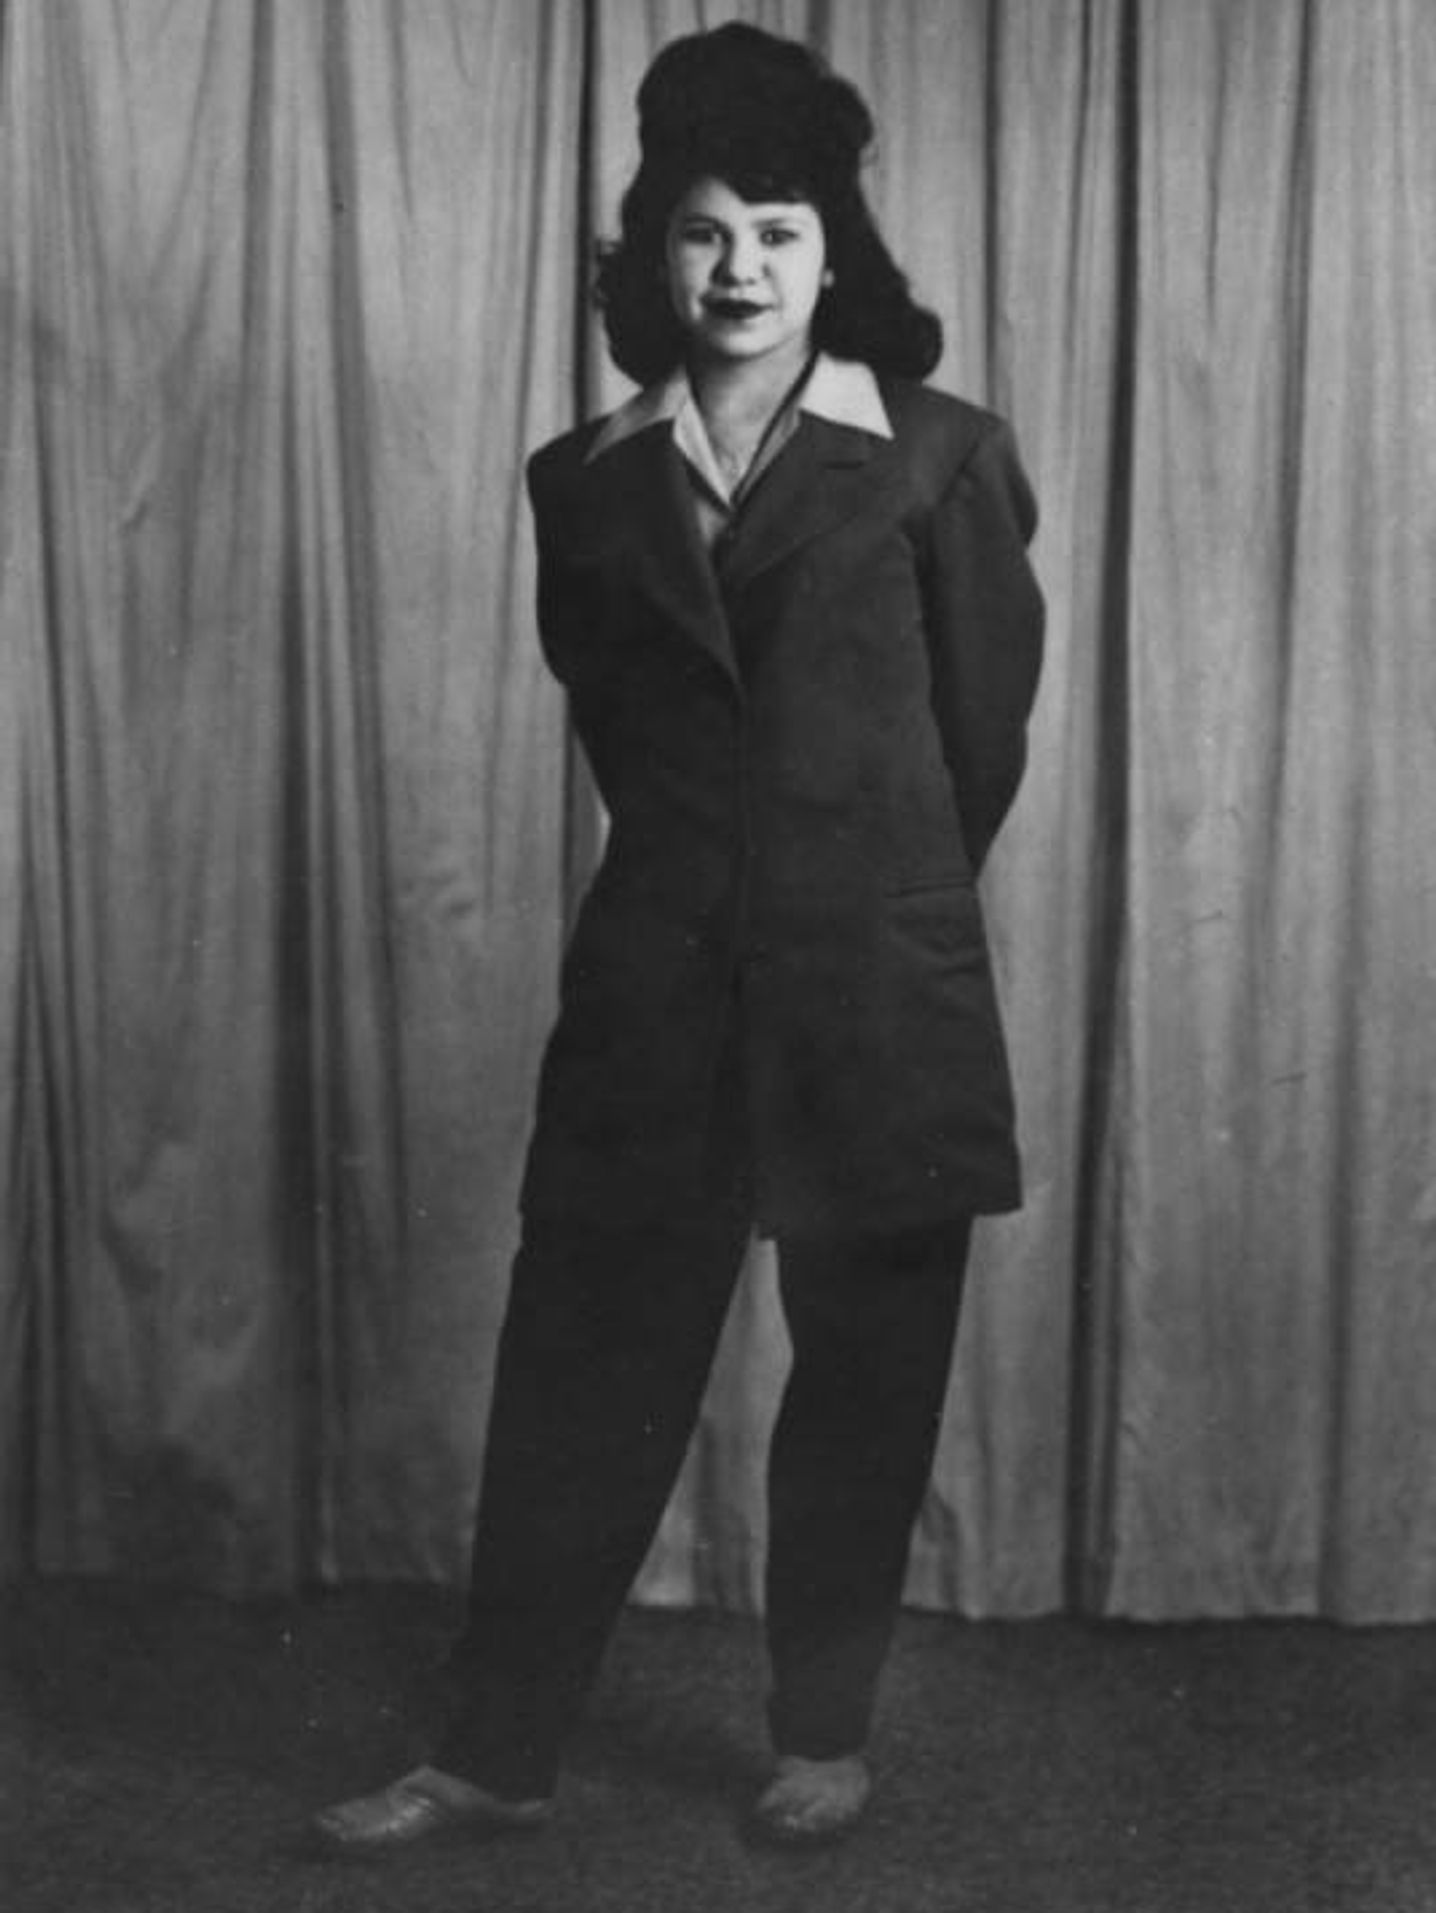 1944 black and white photograph of Ramona Fonseca, a young Mexican-American woman, posing confidently in a stylish zoot suit, representing the fashion and women of that era. The image is part of the historic Shades of L.A. Collection, highlighting the diverse families and communities in Los Angeles.